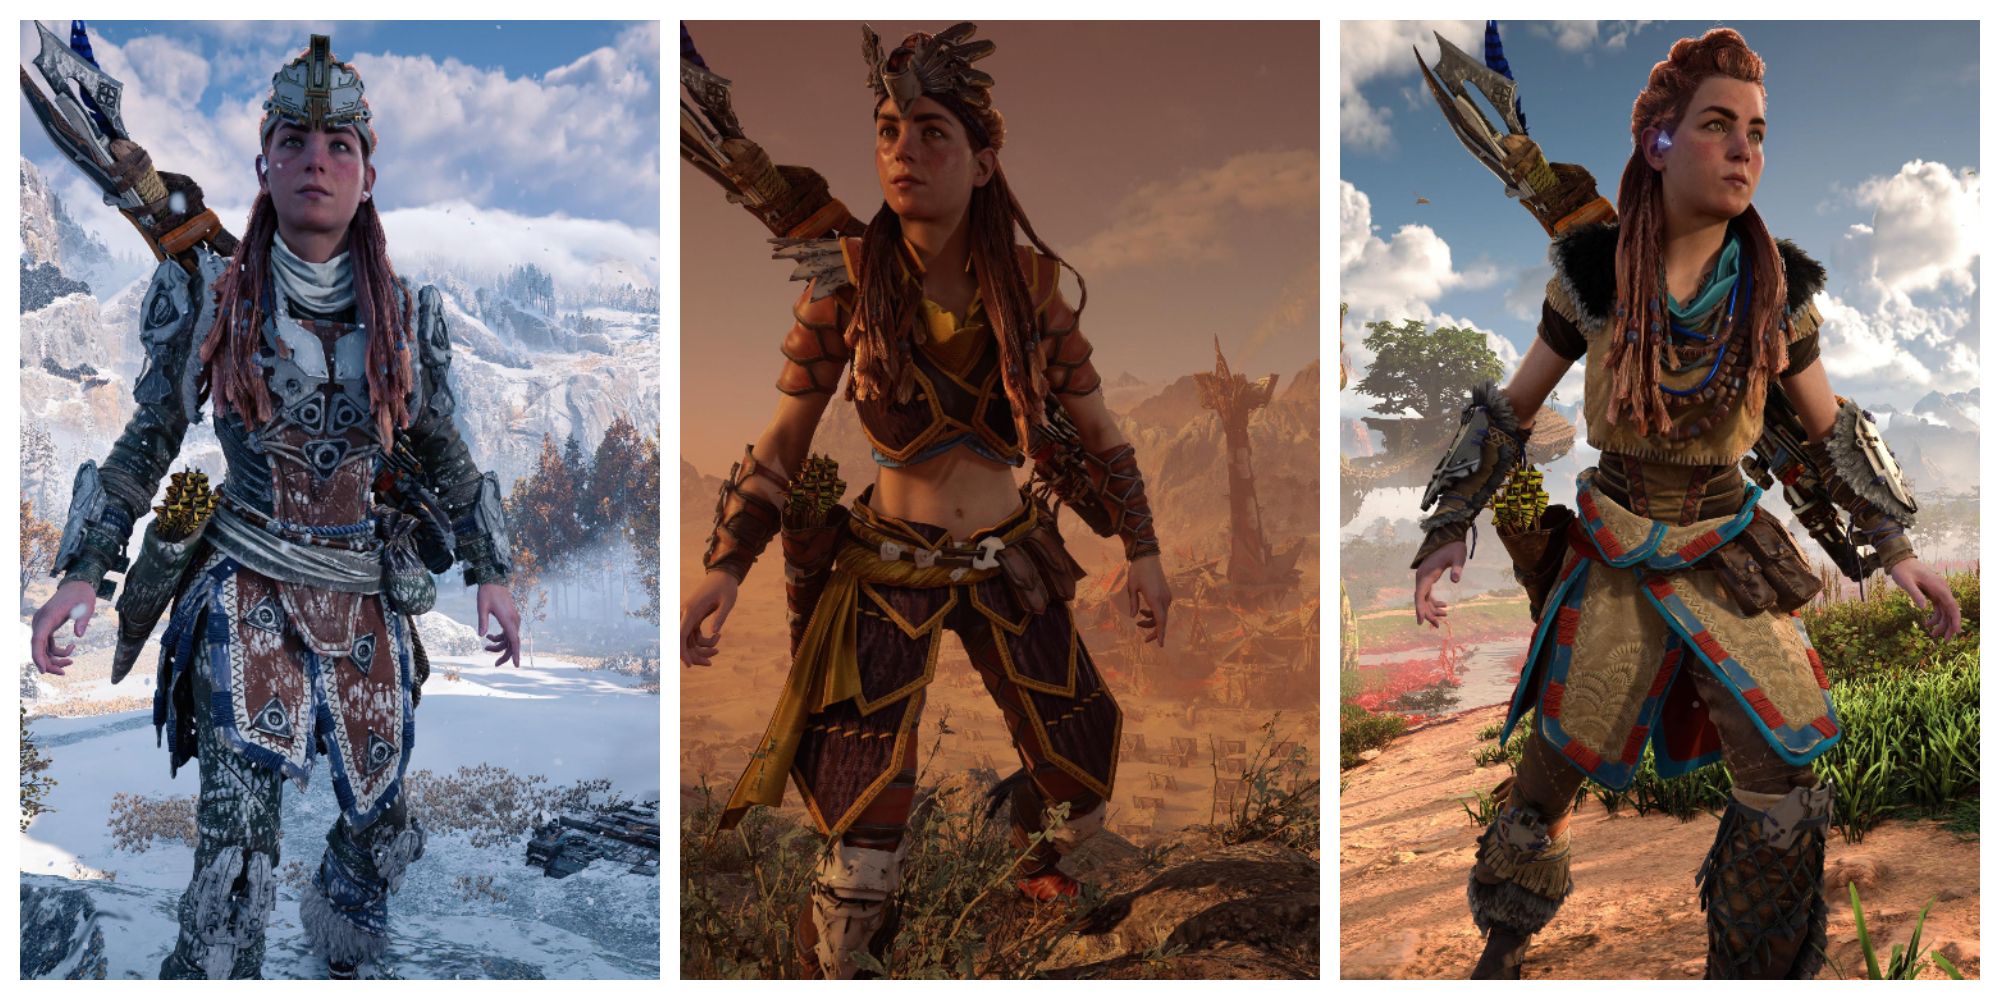 aloy in plated armor standing in a snowy area; aloy in a black and yellow leather armor in a desert; aloy in beige leather standing a grassy field